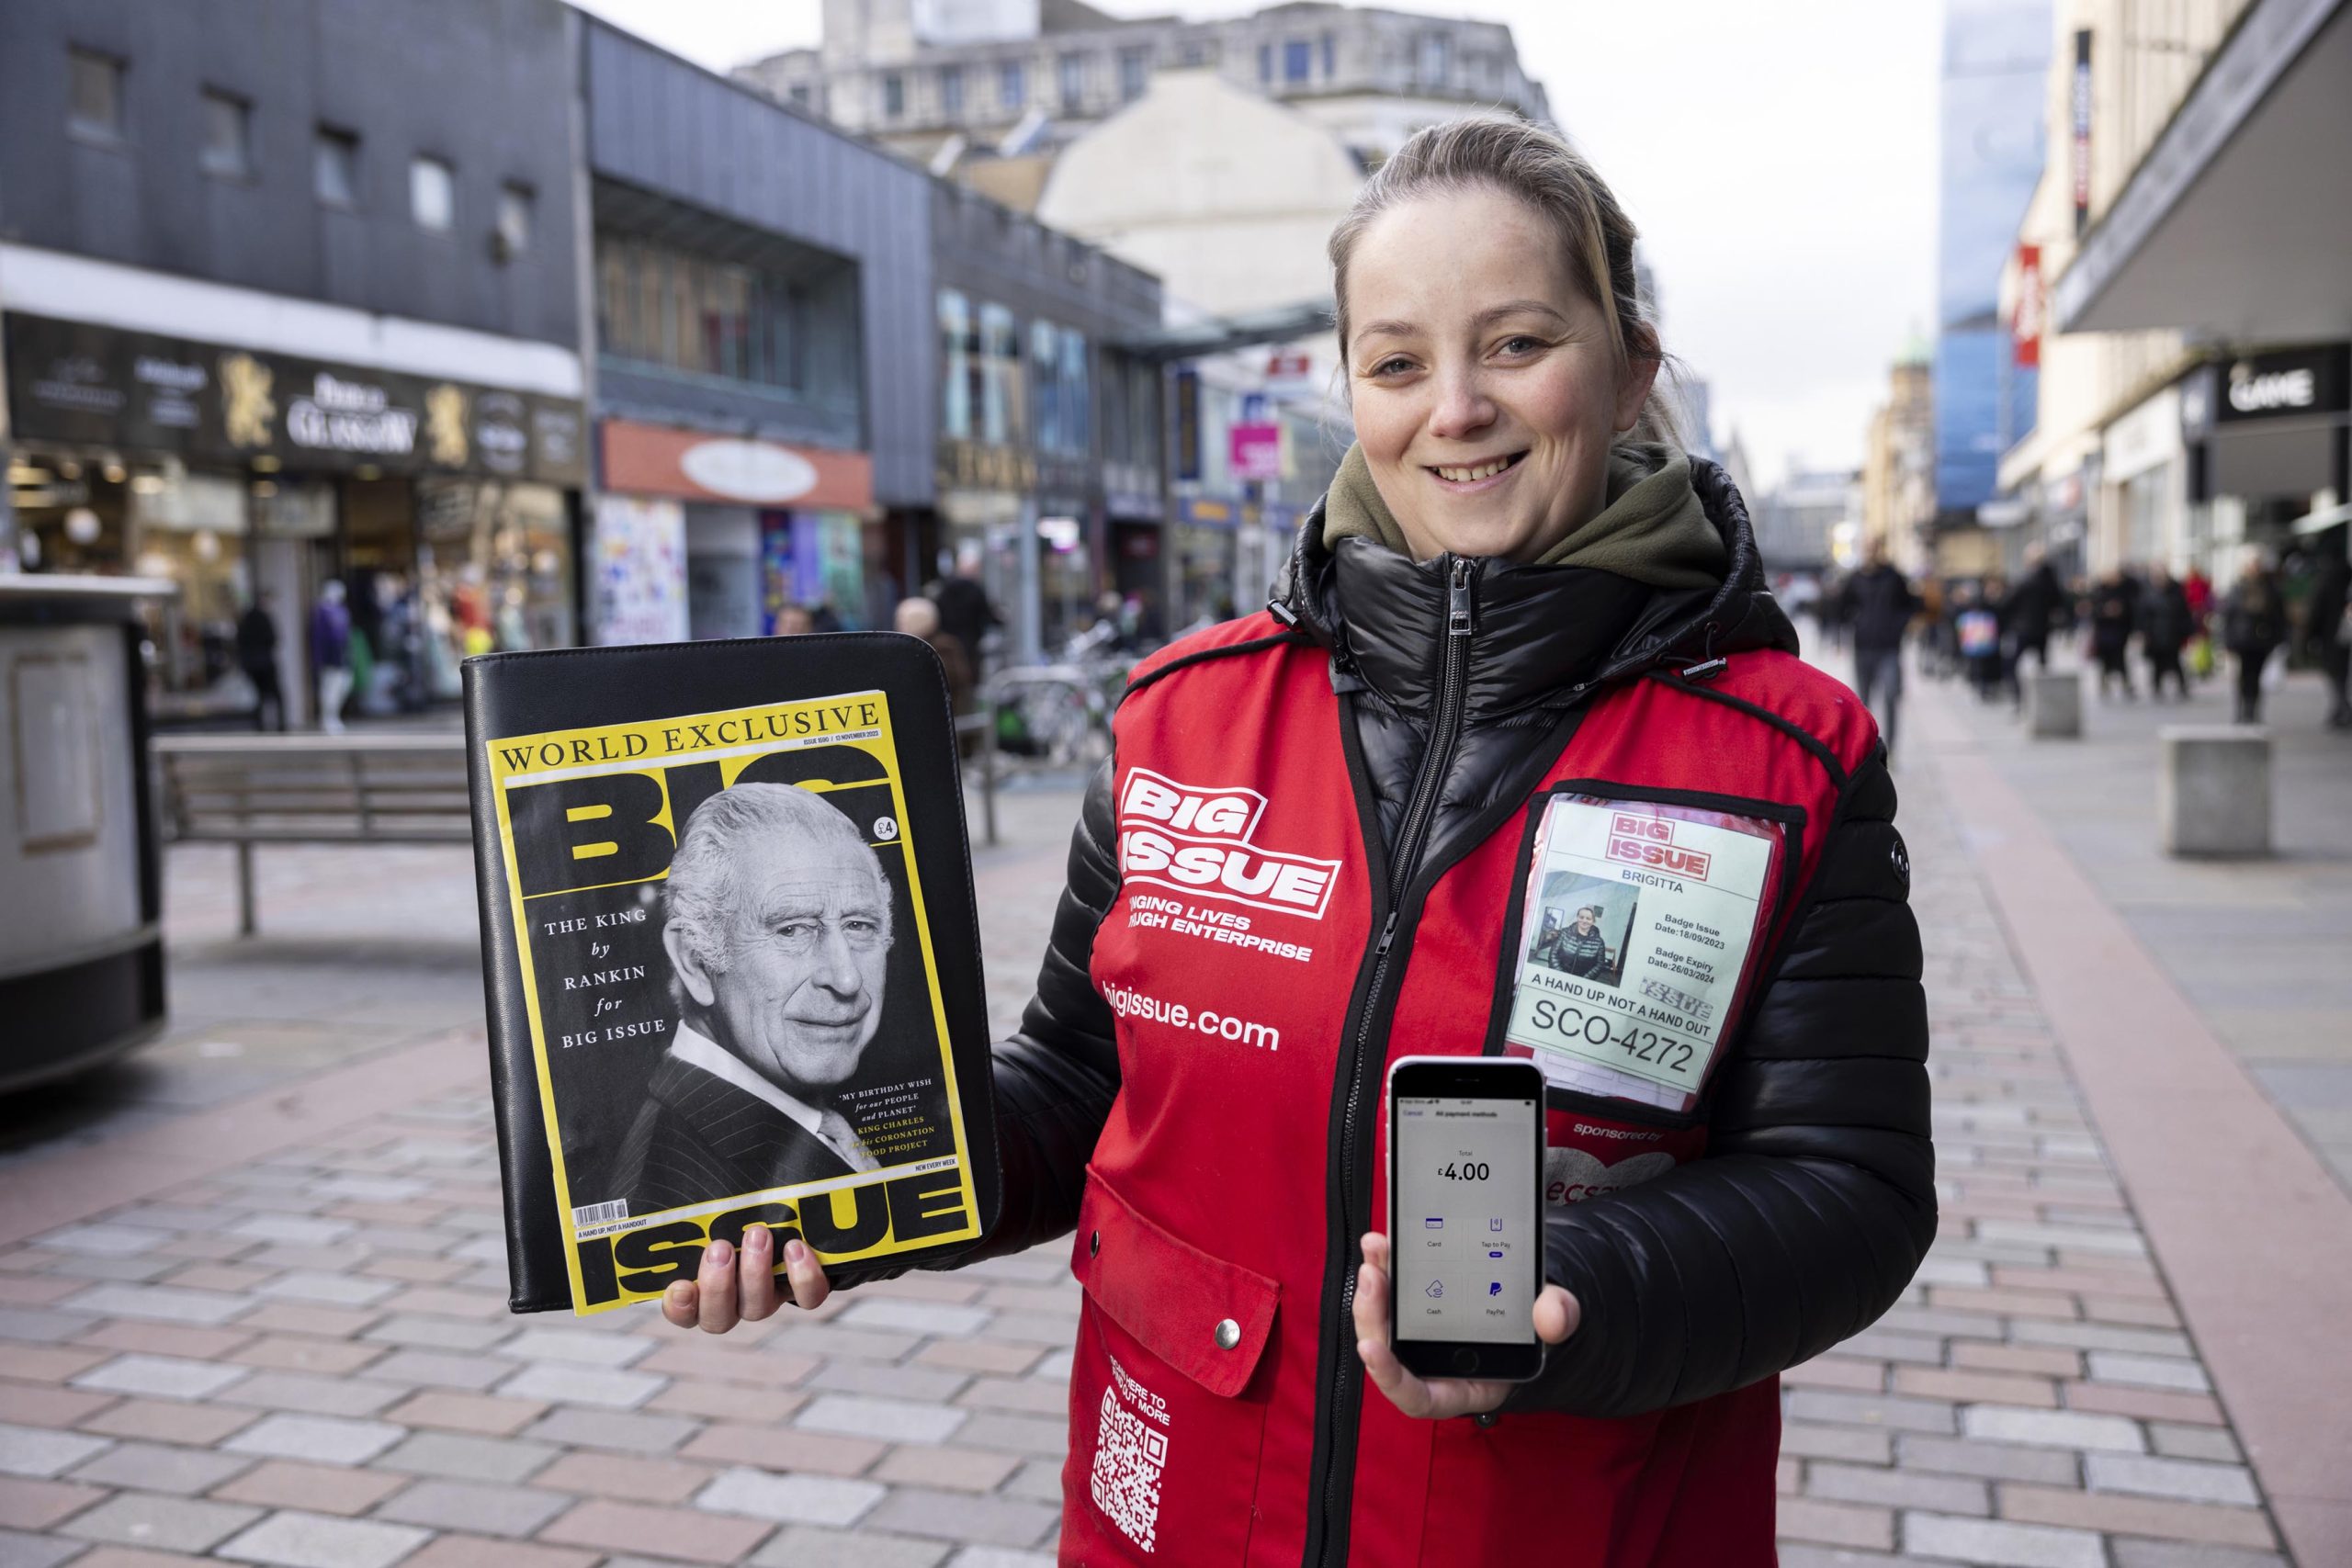 Giffgaff kits out Big Issue sellers with NFC-equipped phones for easier mobile payments